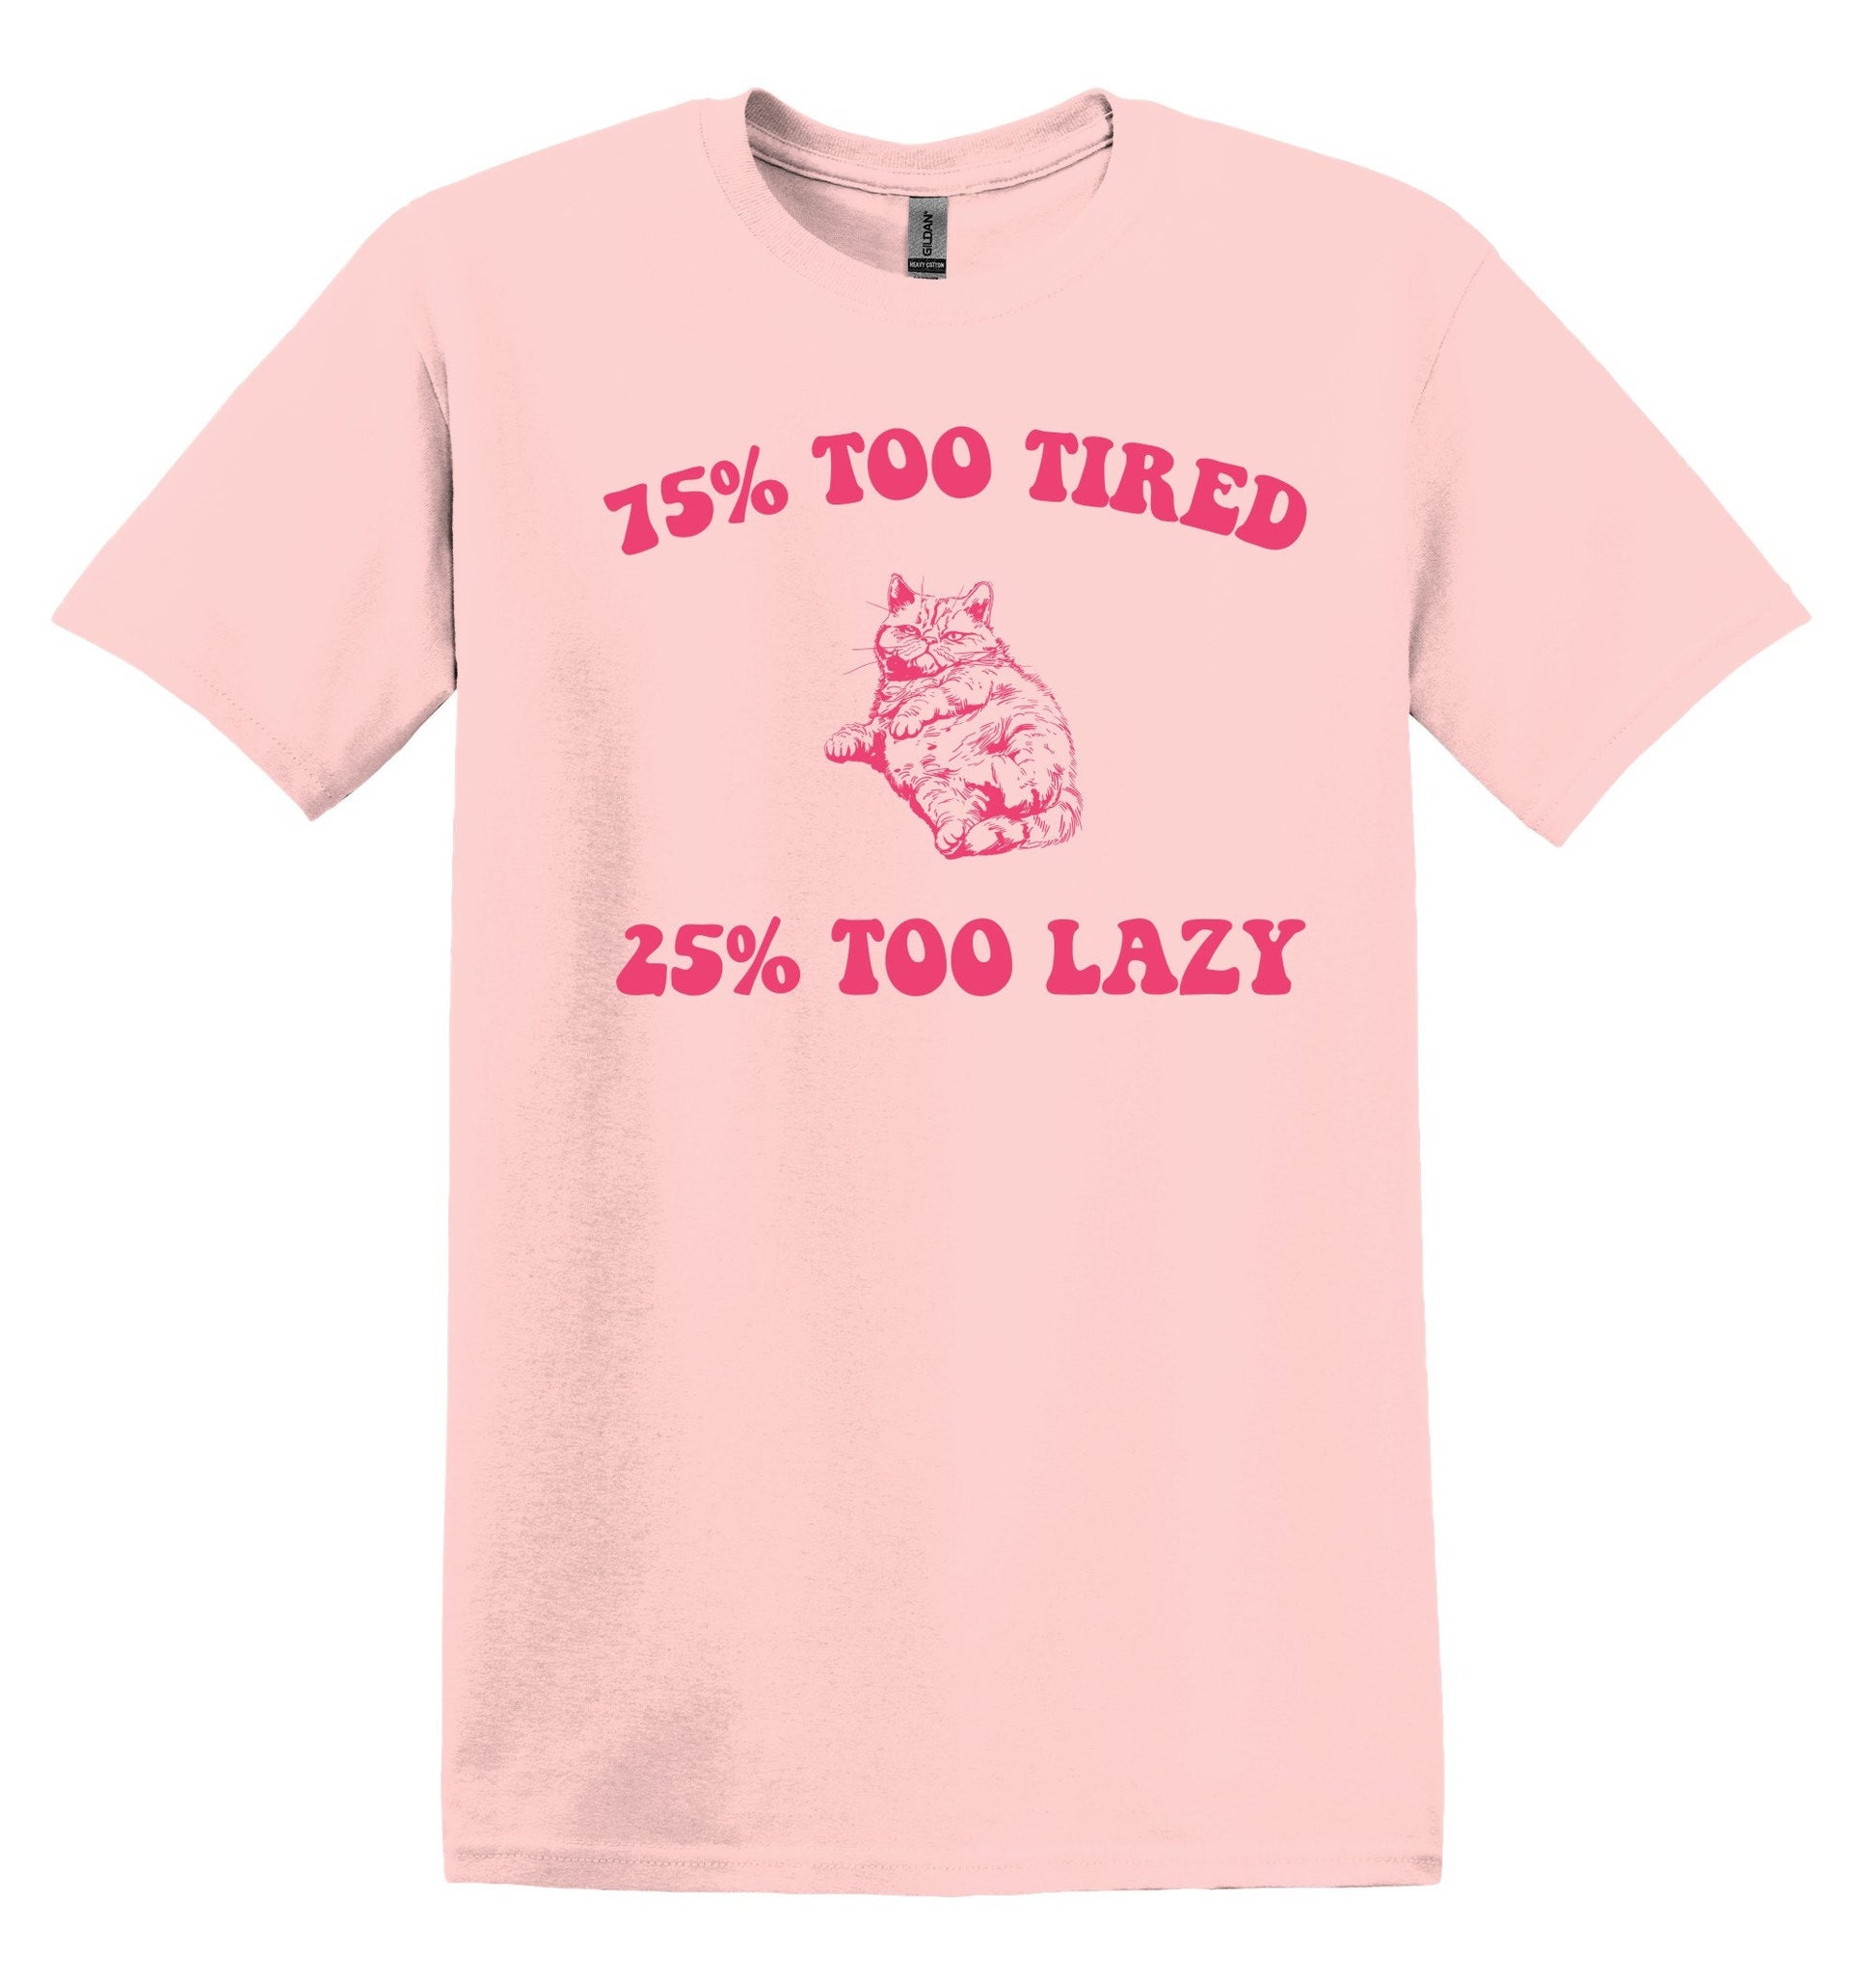 75% Too Tired 25 Too Lazy Cat T-Shirt – Vintage Graphic Shirt for Relaxing Days – Adult Tee